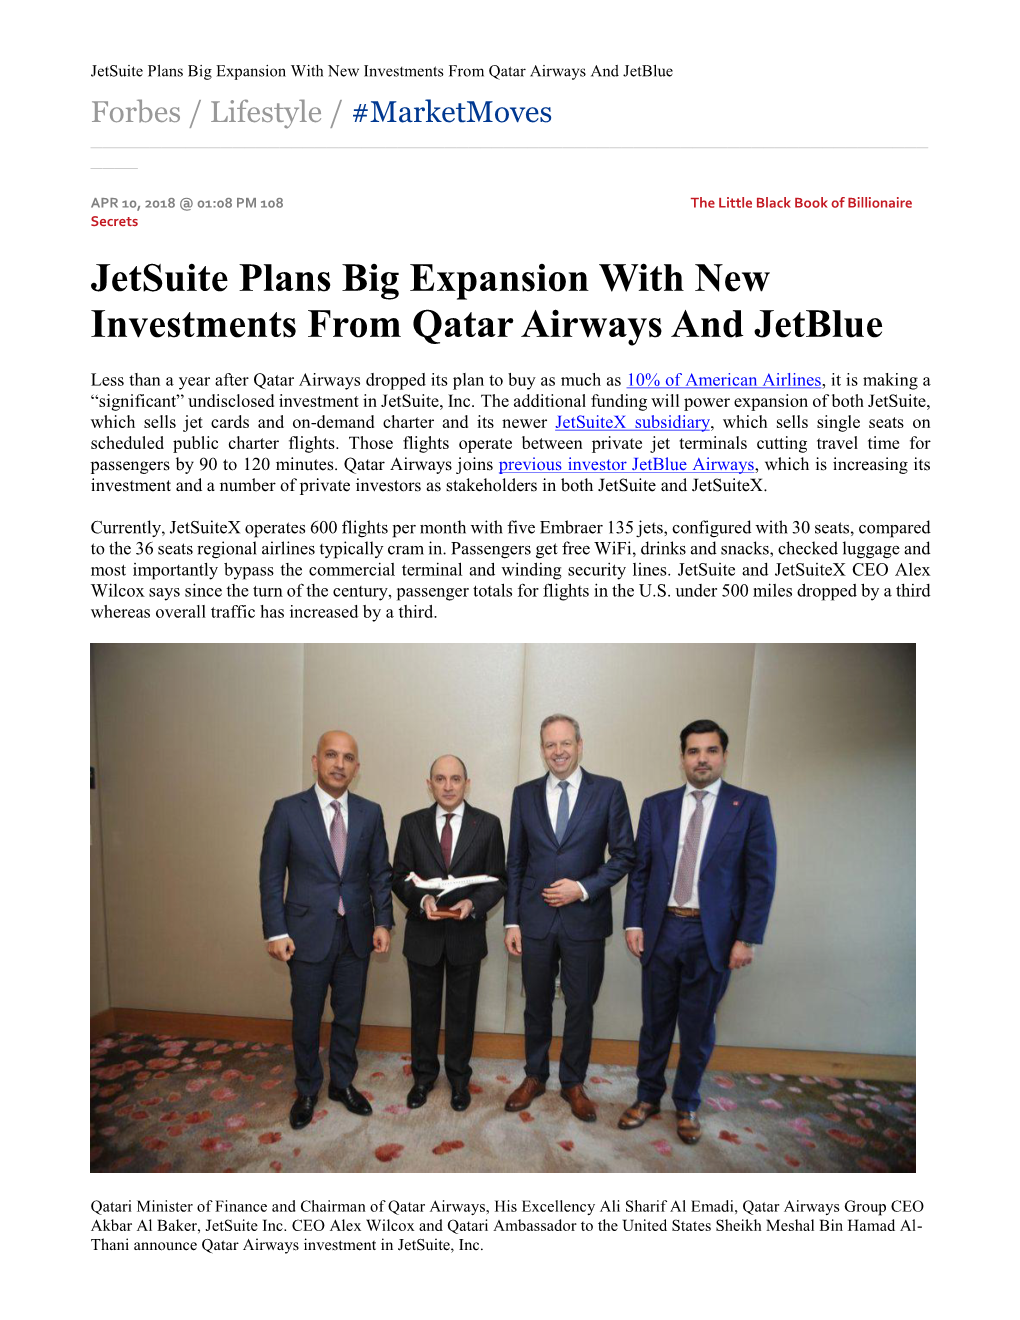 Jetsuite Plans Big Expansion with New Investments from Qatar Airways and Jetblue Forbes / Lifestyle / #Marketmoves ______